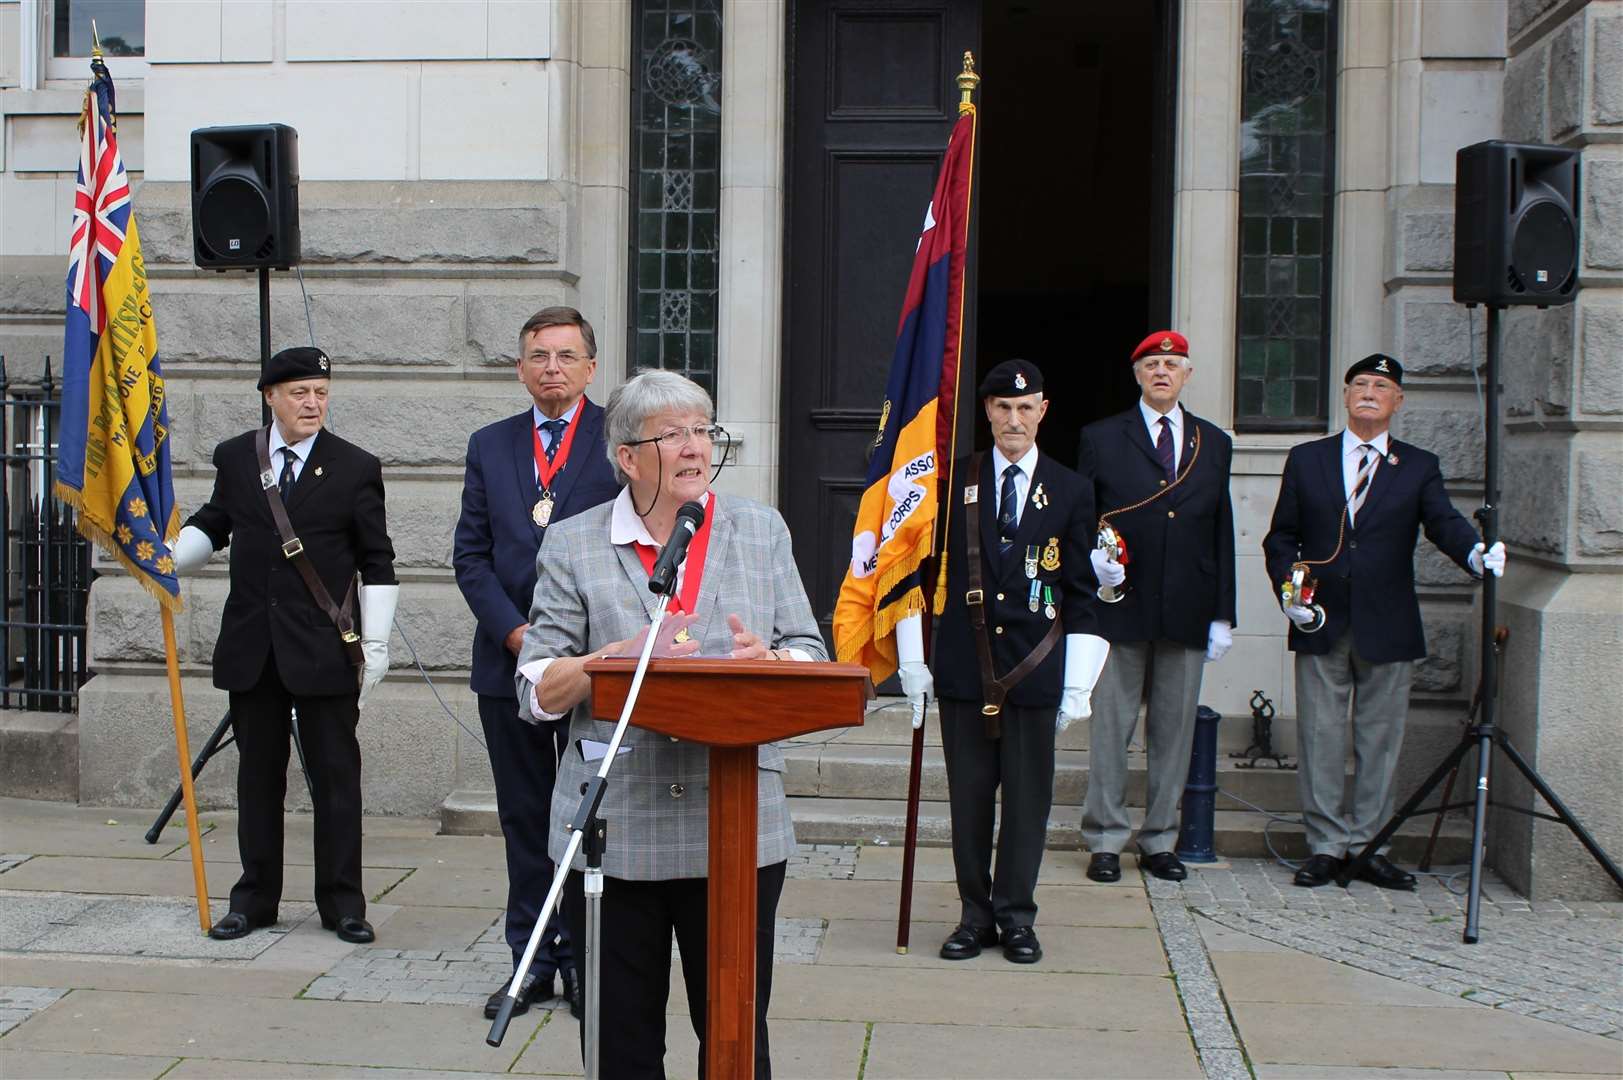 KCC Chairman Ann Allen pays tribute to the Armed Forces